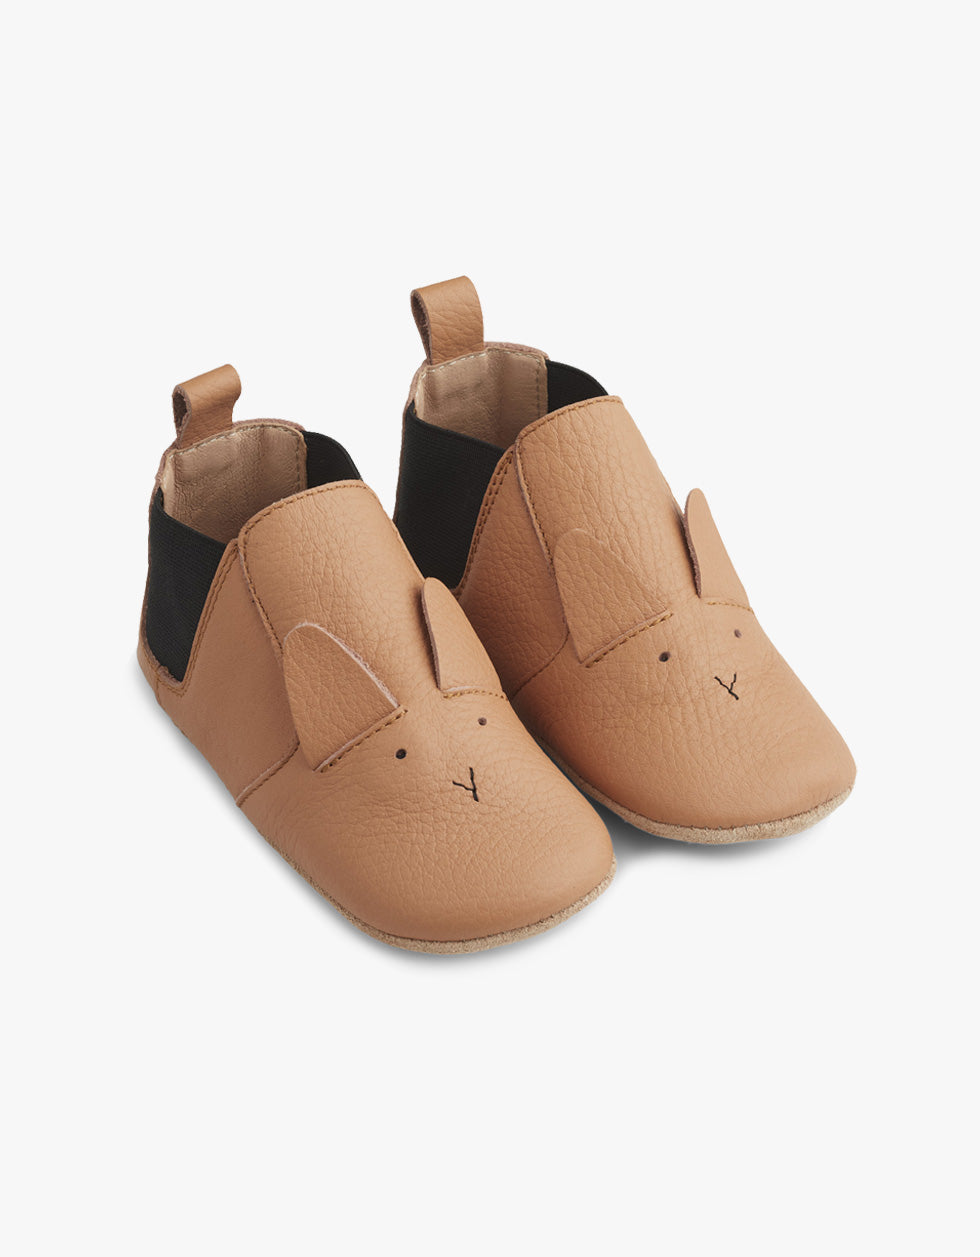 Edith Leather Slippers - Rabbit Tuscany Rose